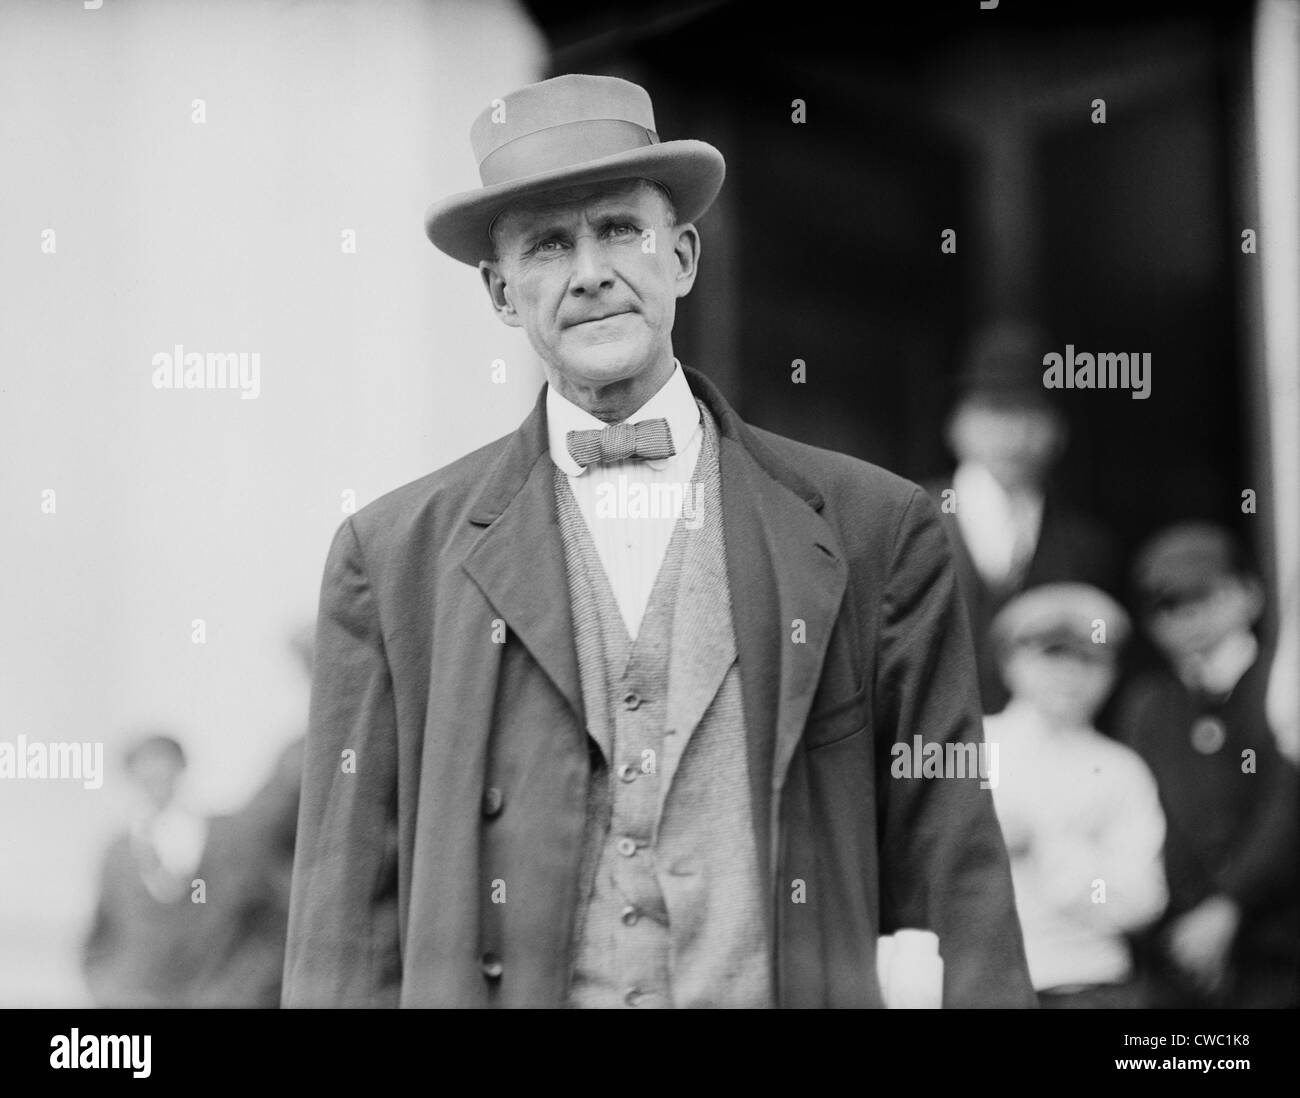 Eugene Debs (1855-1926) in 1912. He was one of the founding members of the Industrial Workers of the World (IWW), and leader in Stock Photo